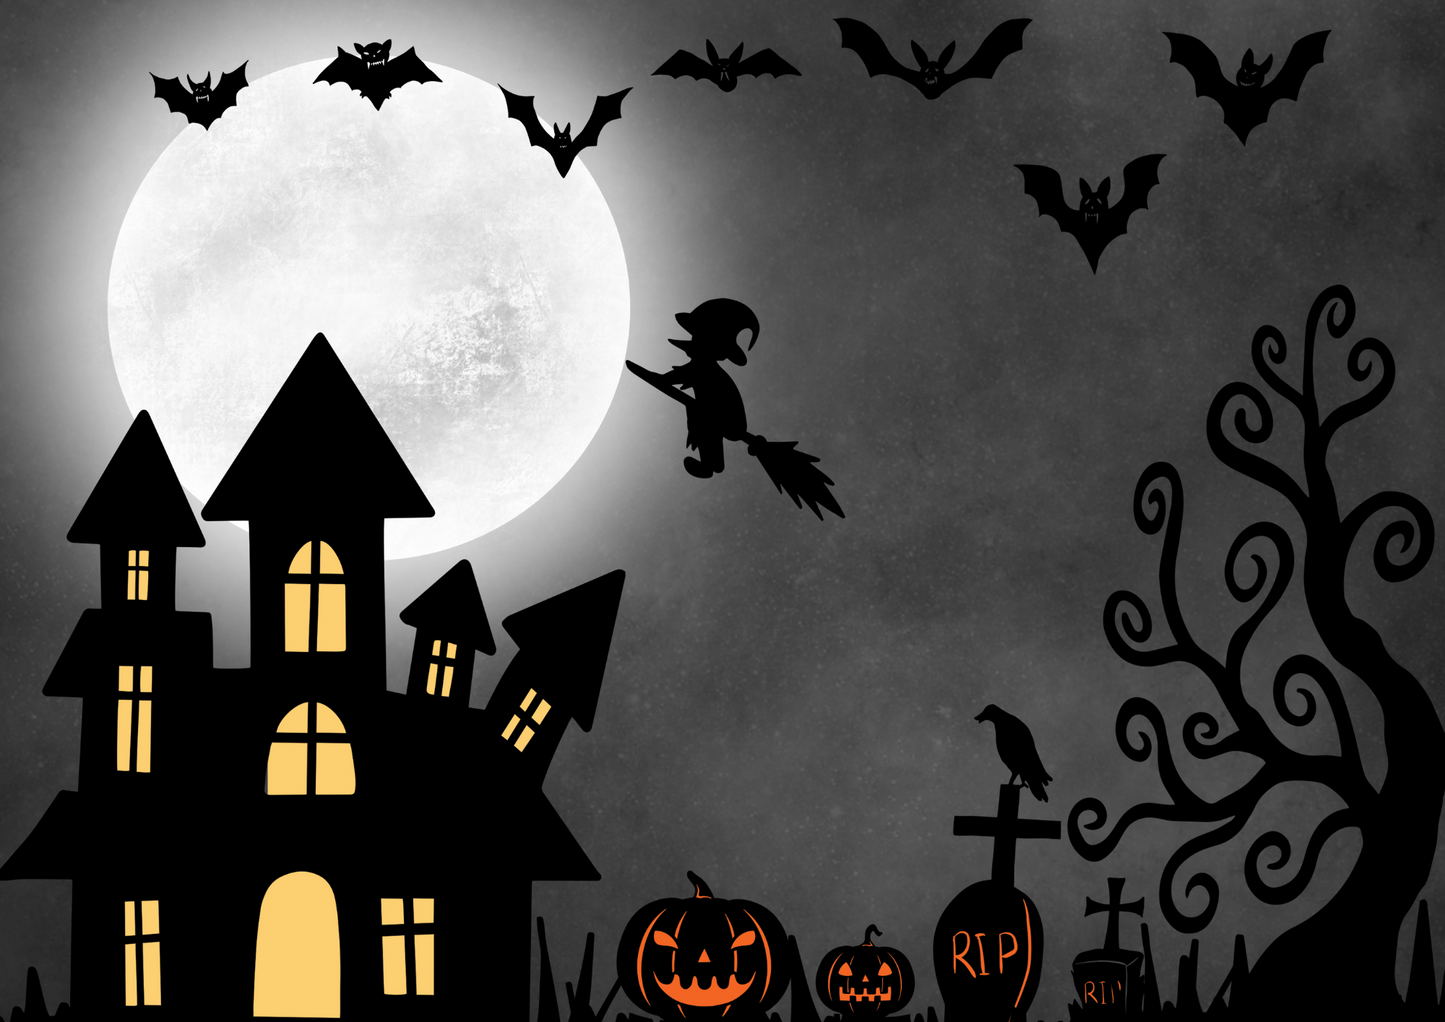 Image for tote - grey background  with witch and bats in air, haunted house and spooky tree, grave stones, and with jack-o-lanterns